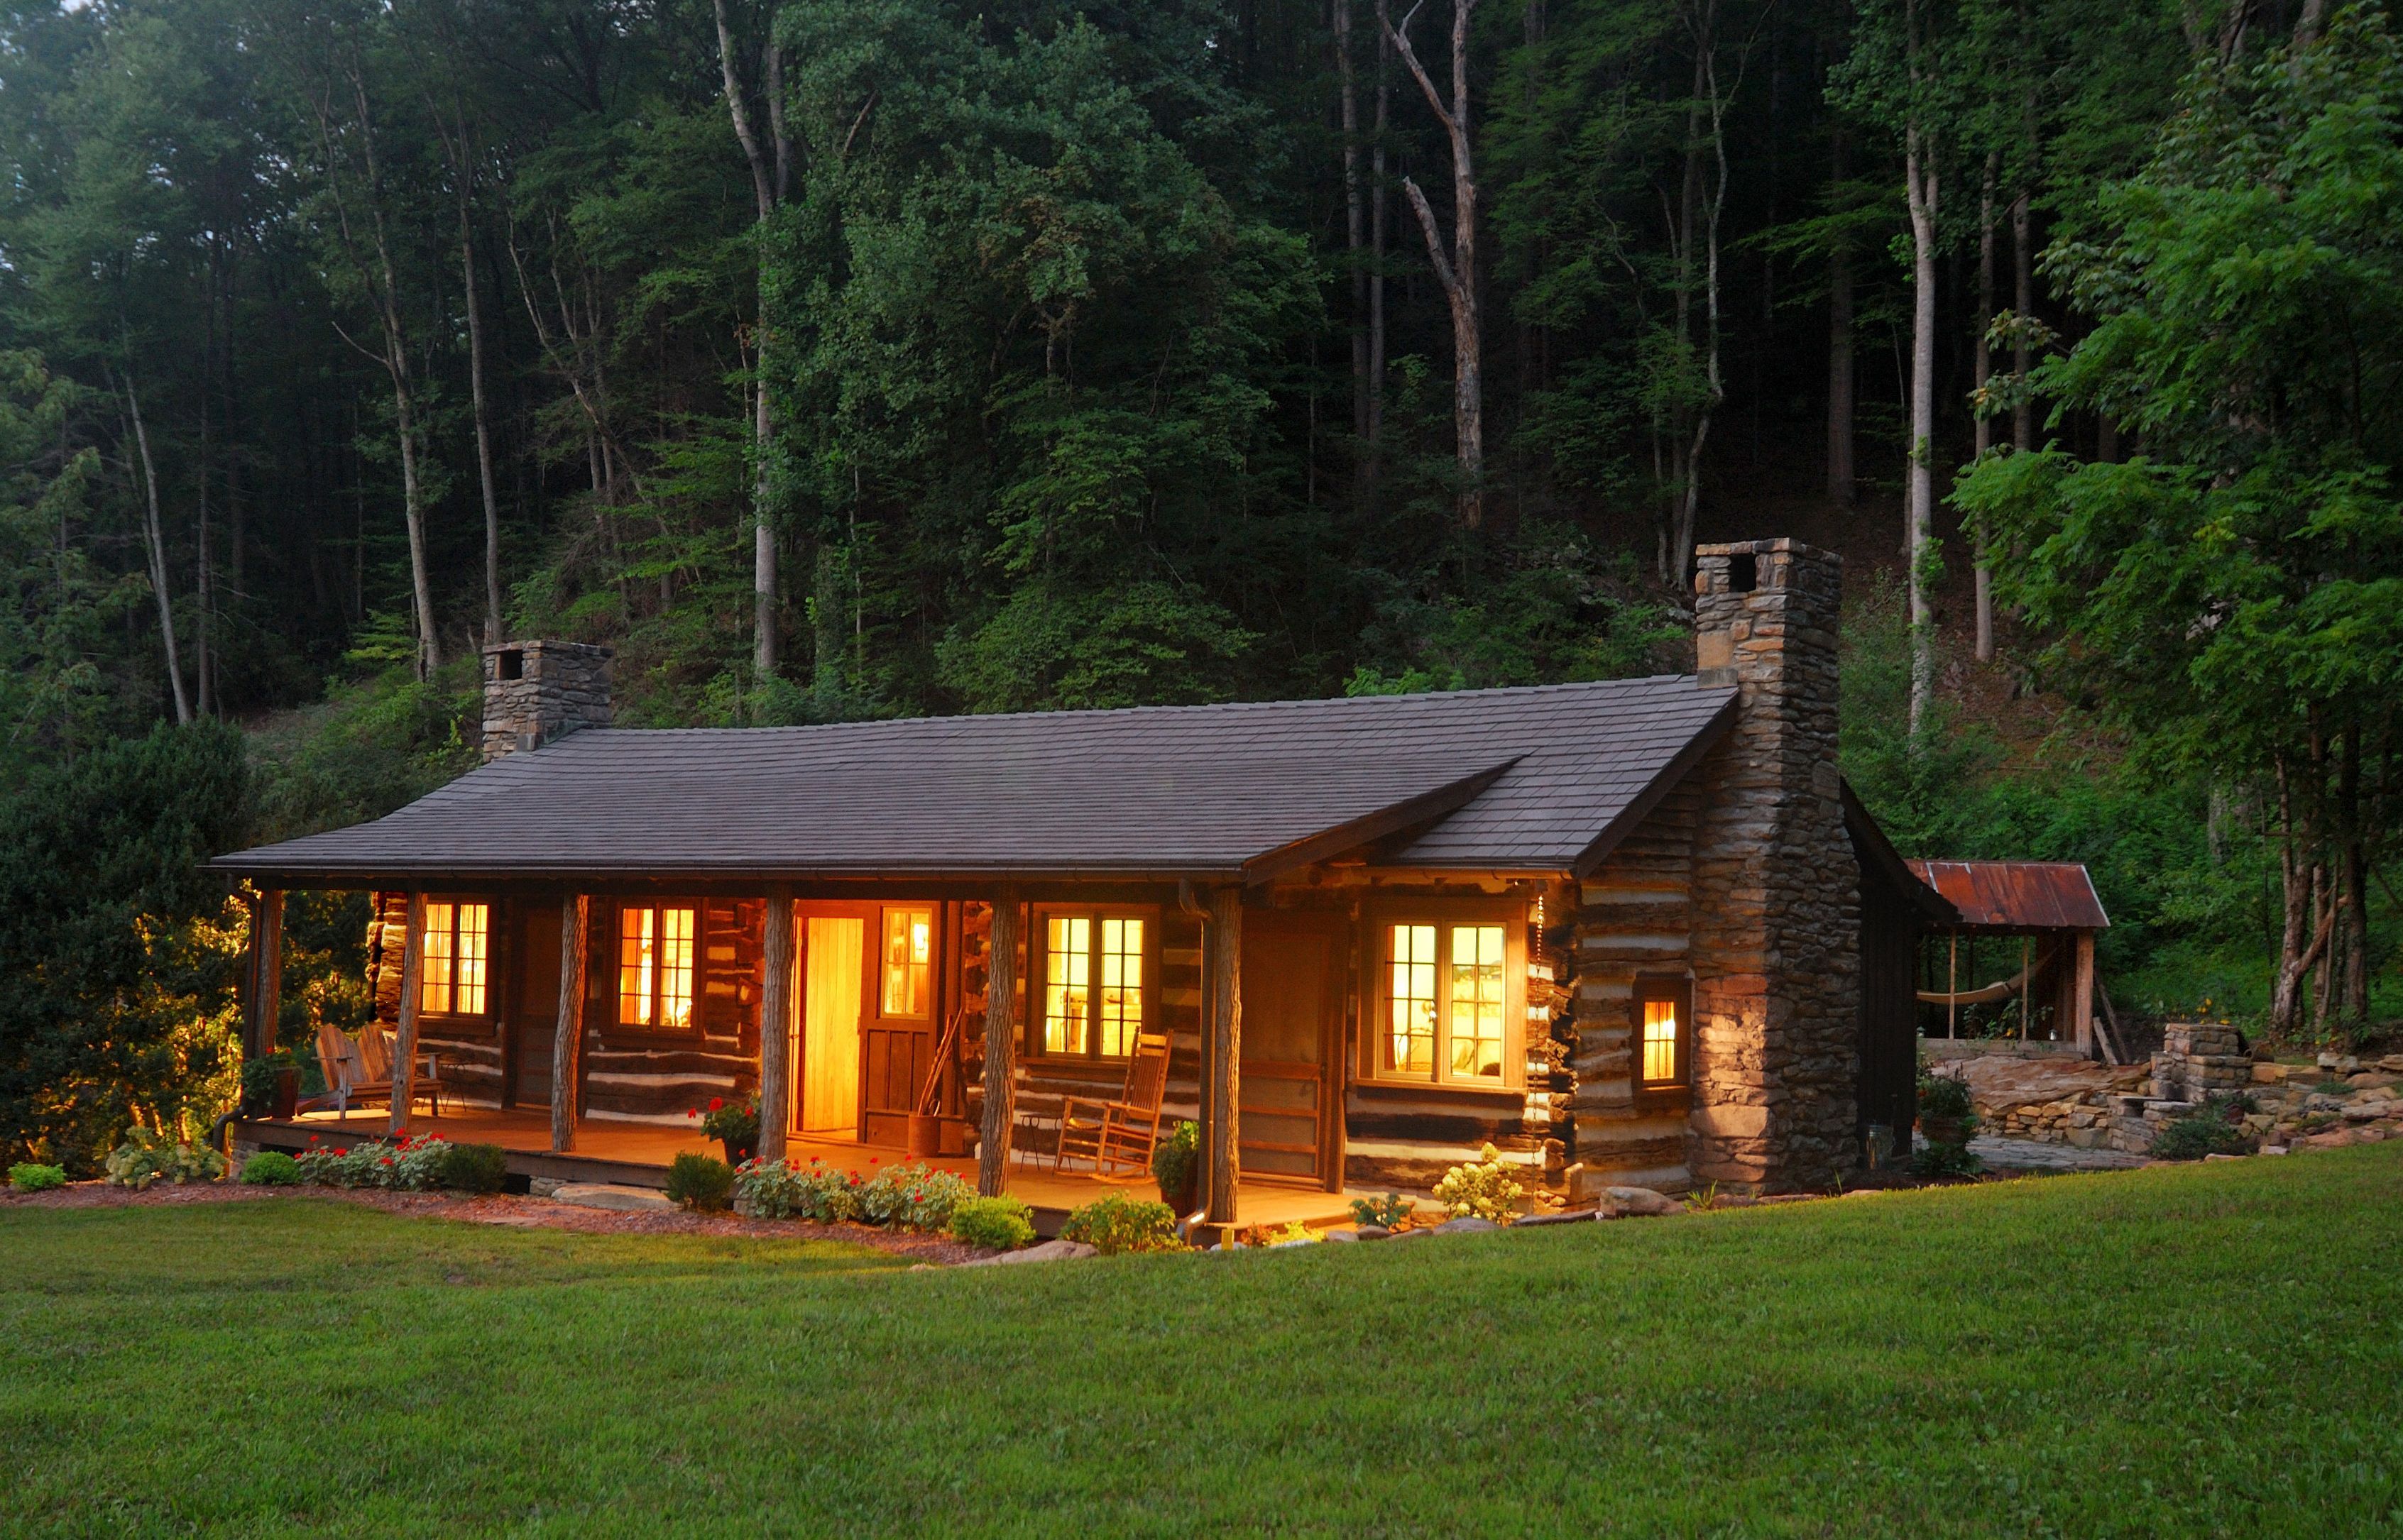 30 Magical Wood Cabins to Inspire Your Next Off-The-Grid Vacay ...